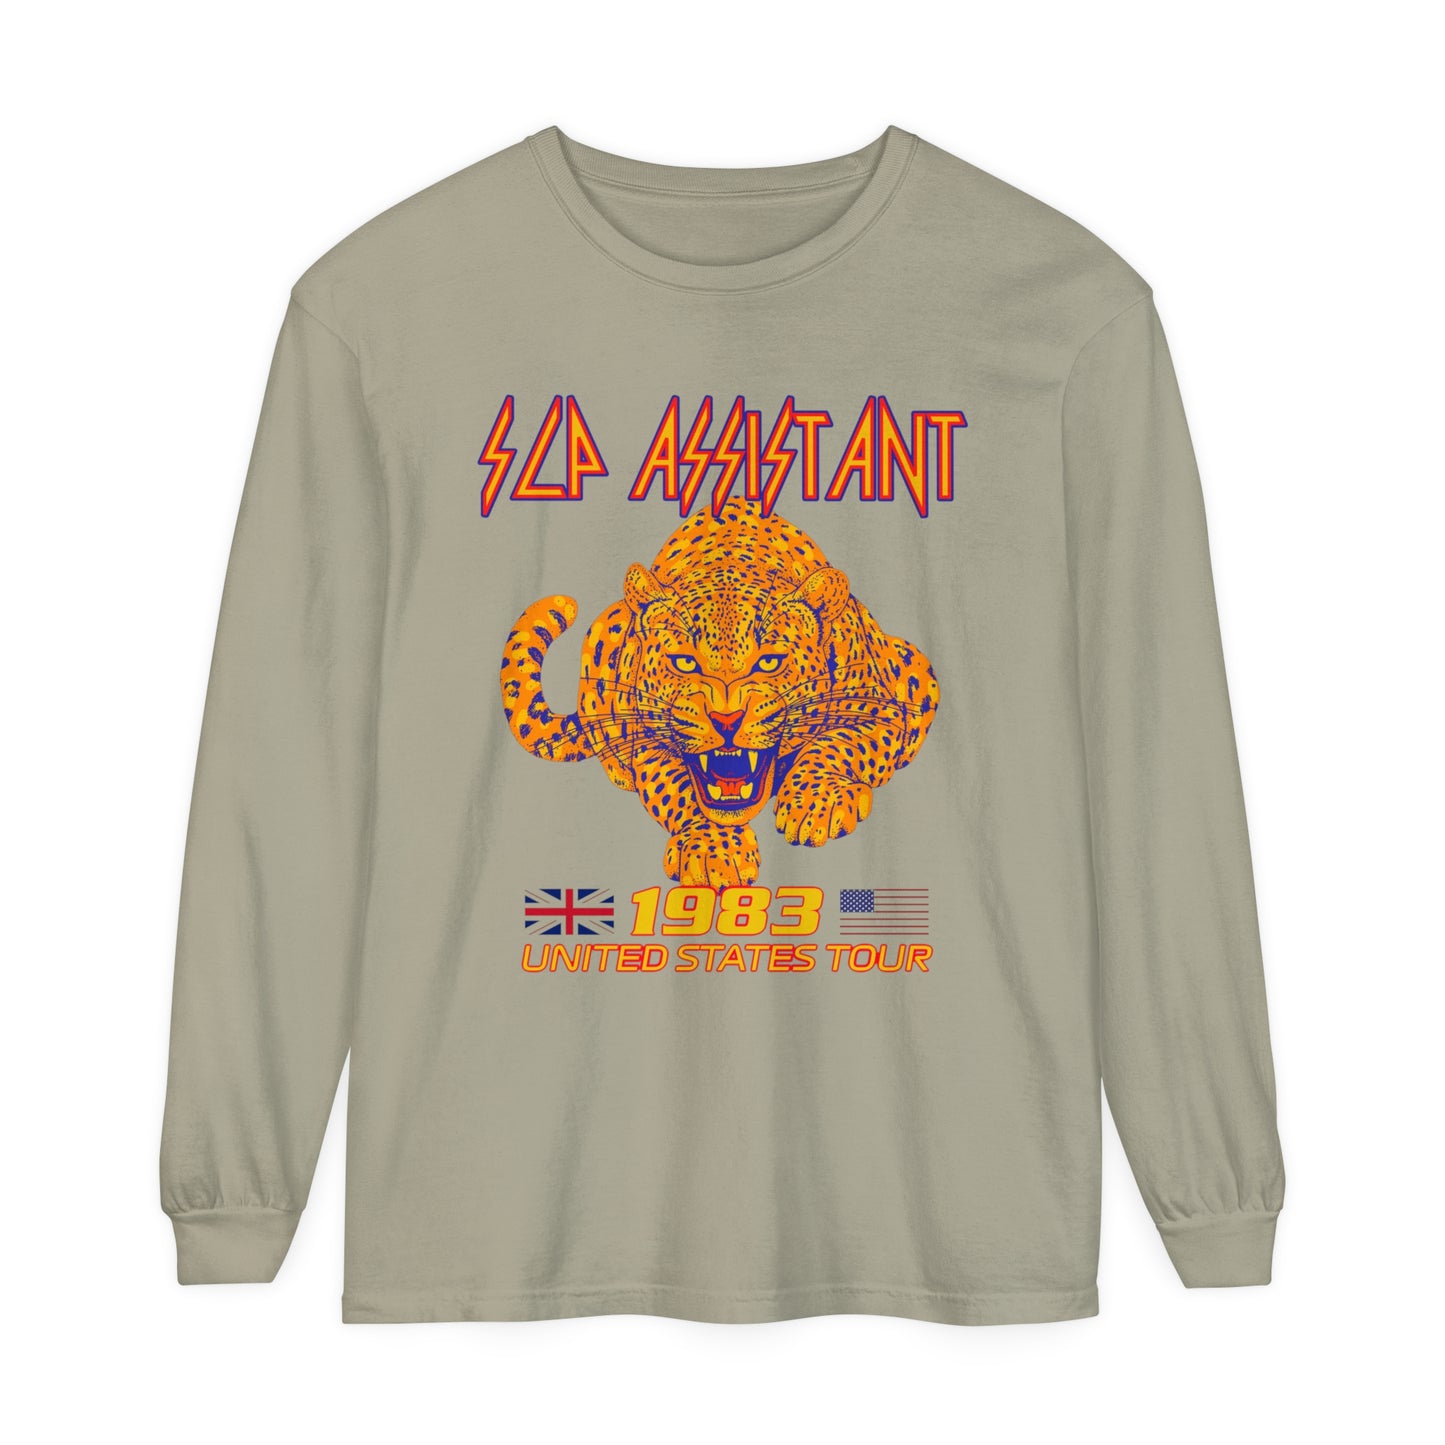 Def SLP Assistant Band Inspired Comfort Colors T-Shirt